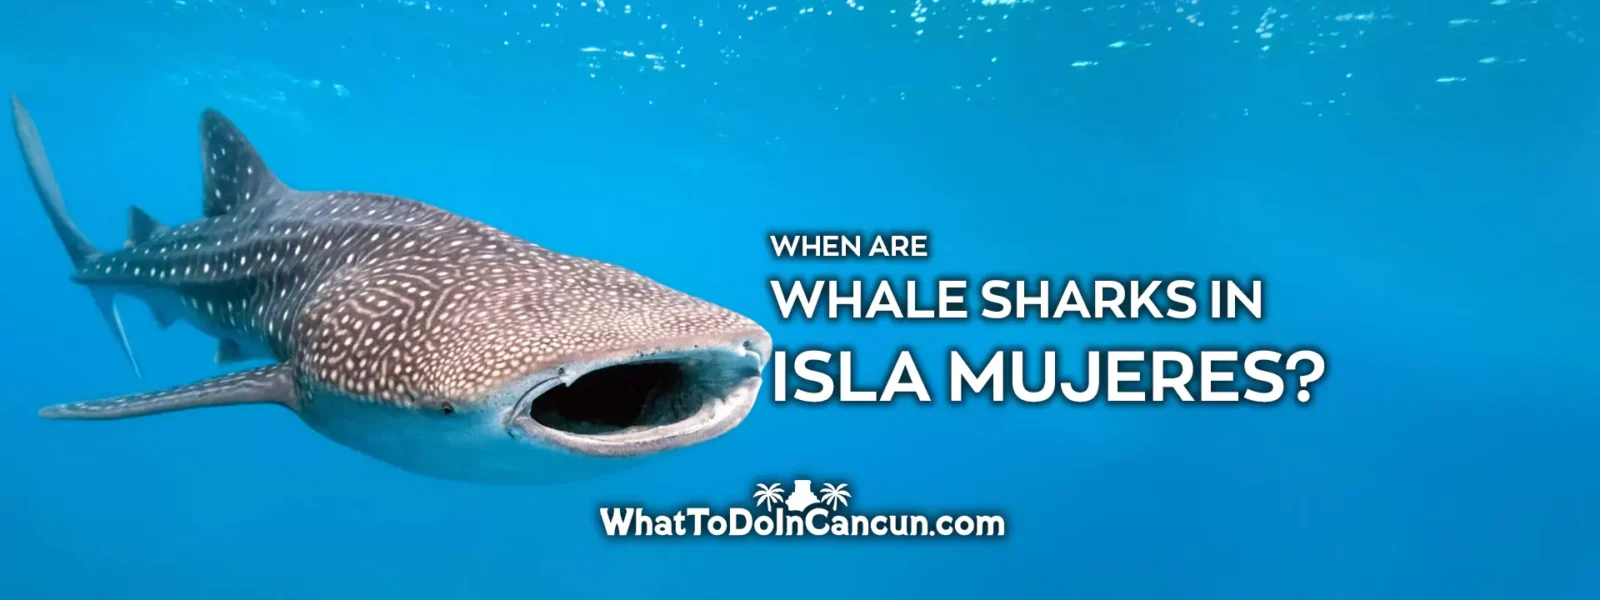 when-are-whale-sharks-in-isla-mujeres